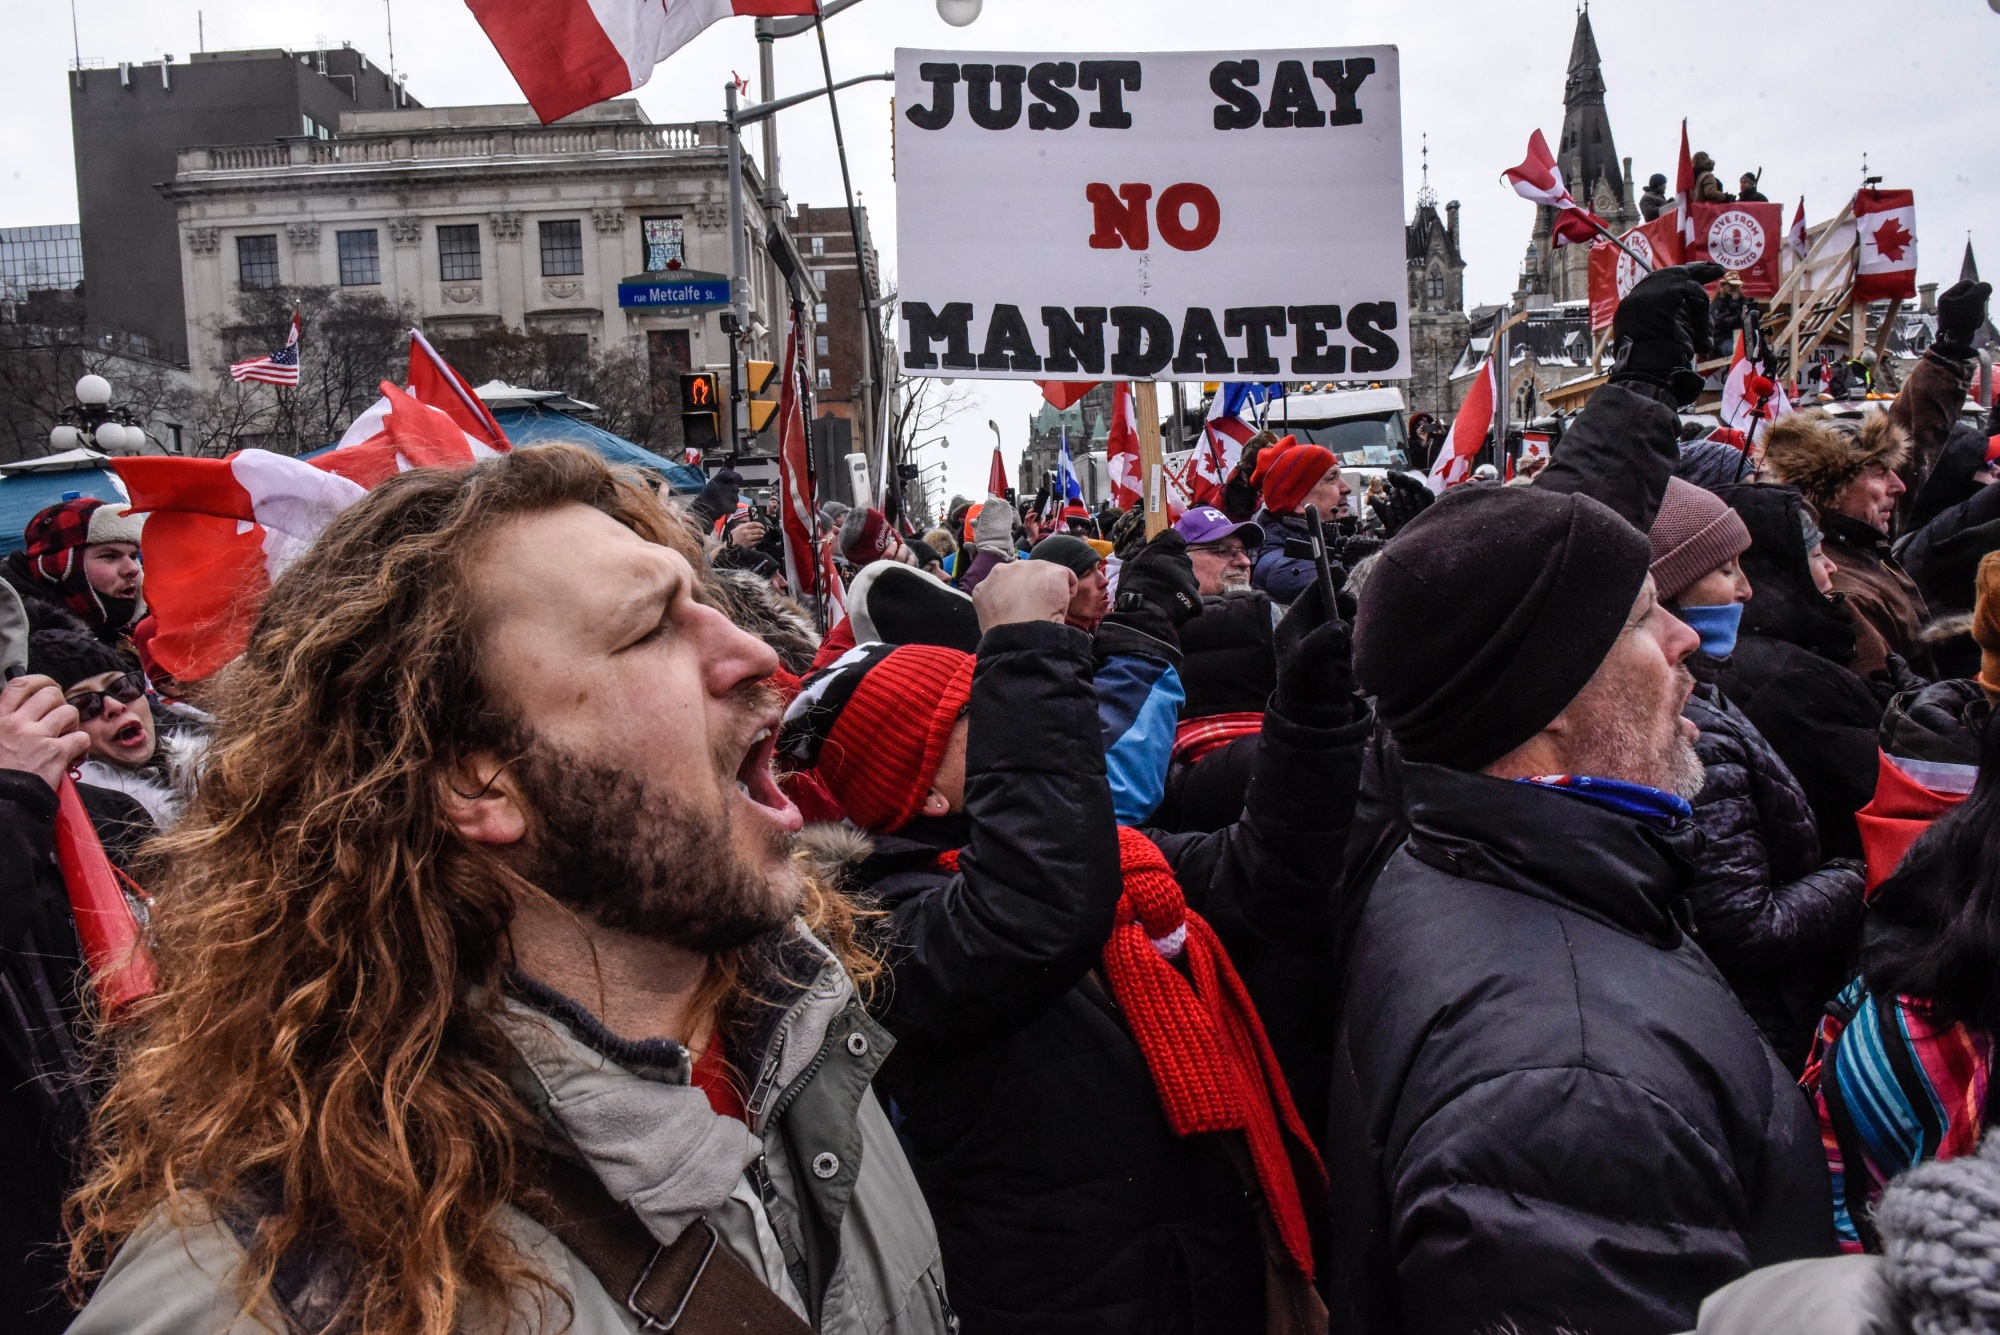 Protesters during a demonstration near Parliament Hill in Ottawa, Ontario, Canada, on Feb. 12.